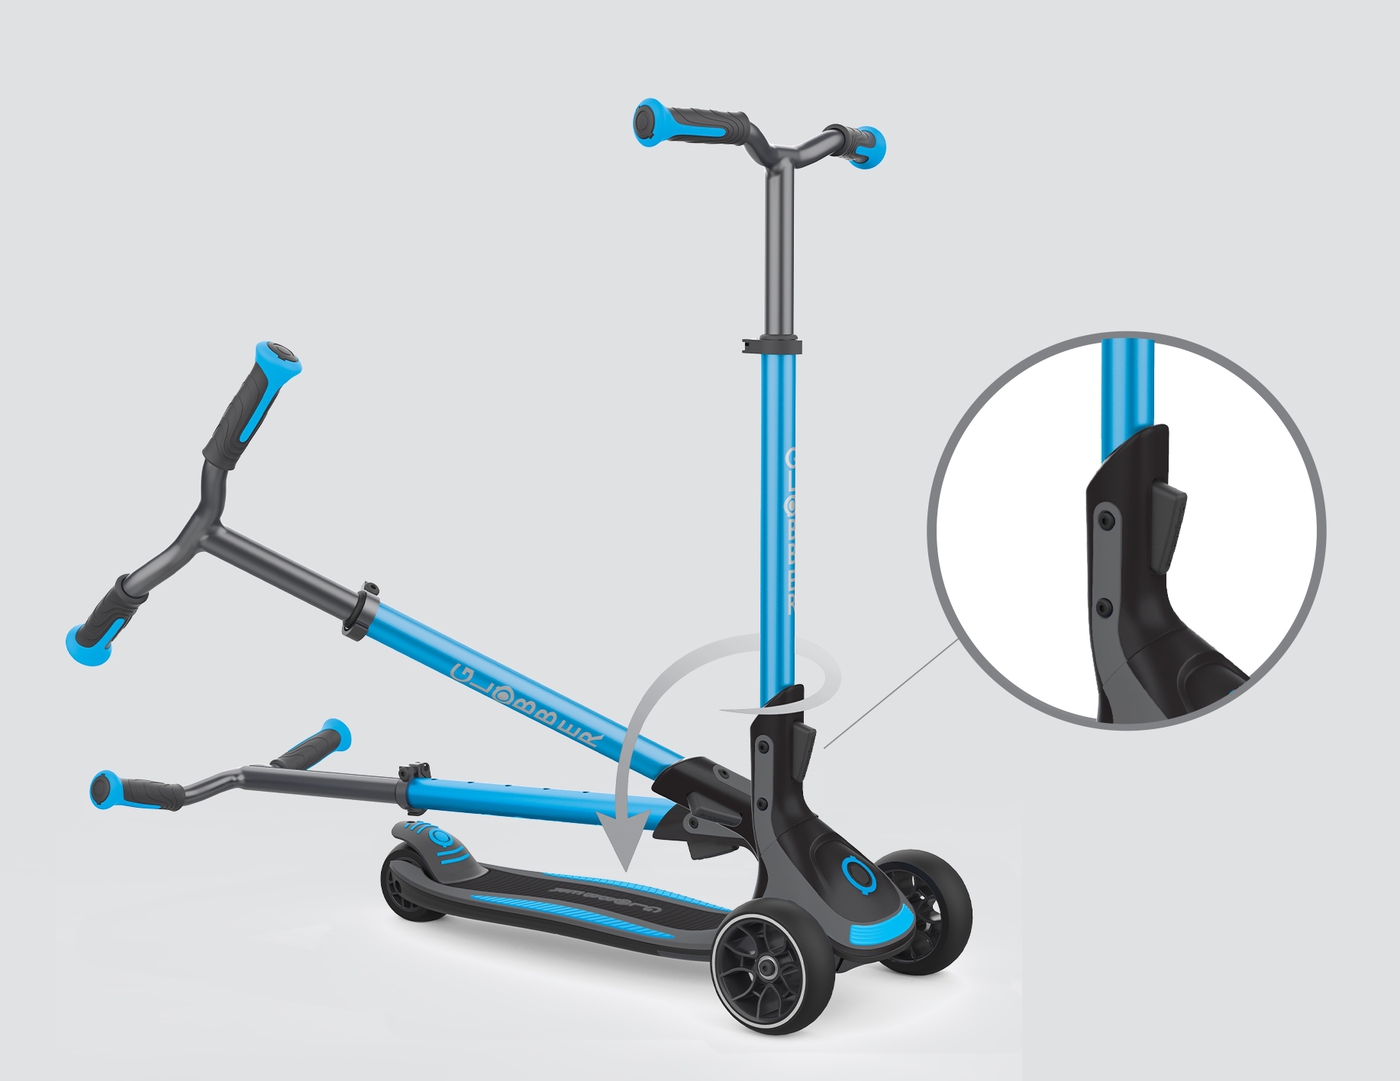 3-wheel foldable scooter for kids and teens